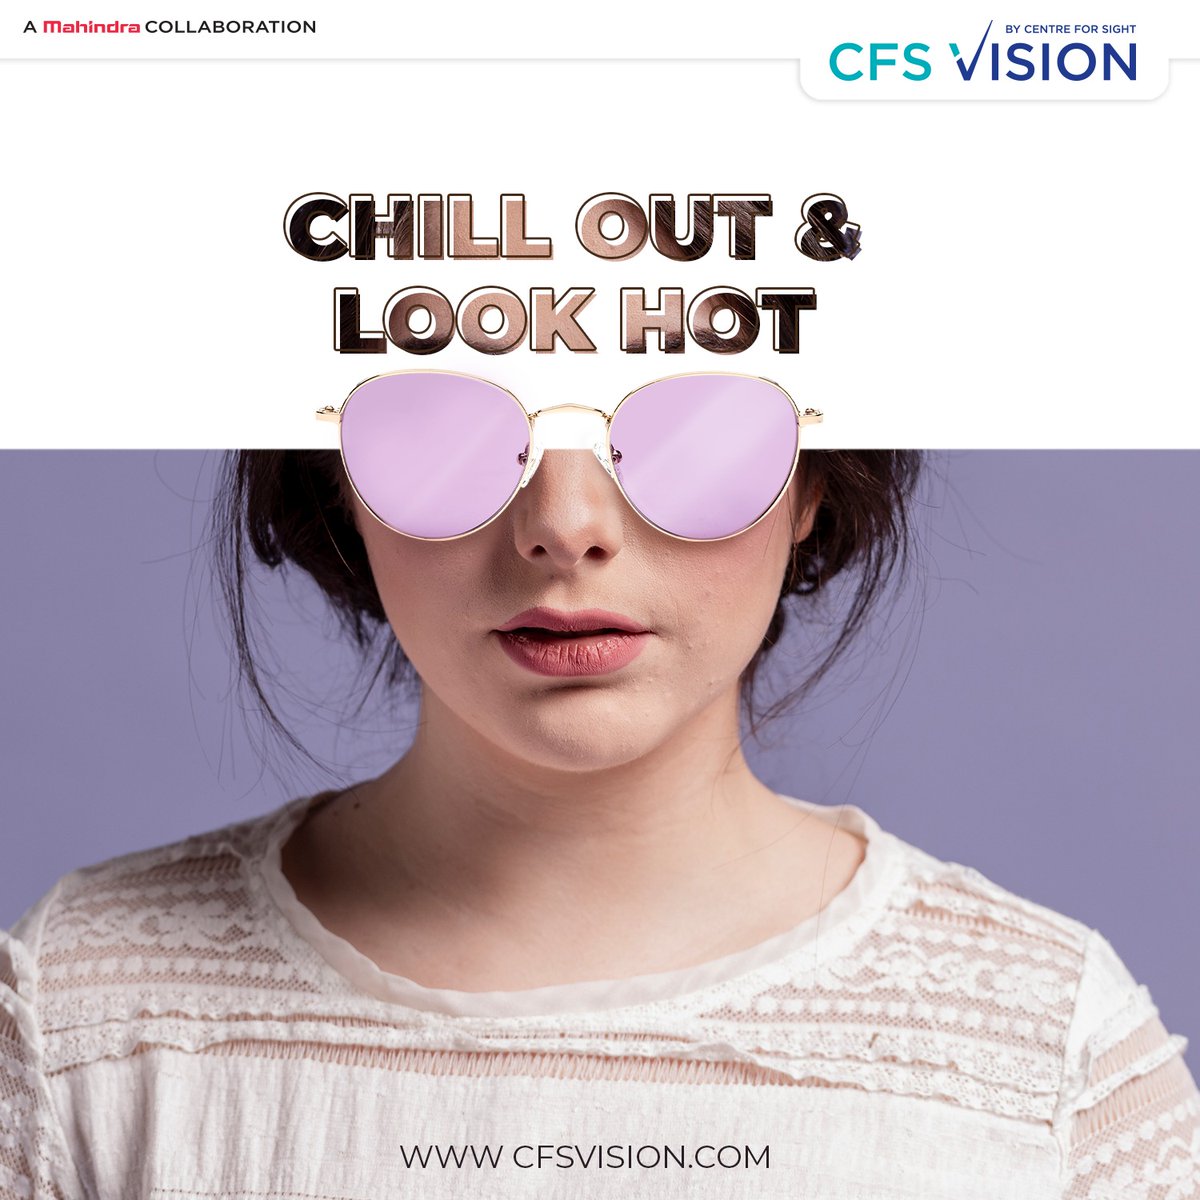 Confidence is my best accessory, and these sunglasses are the coolest match. 

Order a perfect pair of shades at cfsvision.com

#cfsvision #sunglasses #sunglassesstyle #sunglasseslover #sunglassesaddict #eyewearlover #eyewearstyle #eyeweartrends